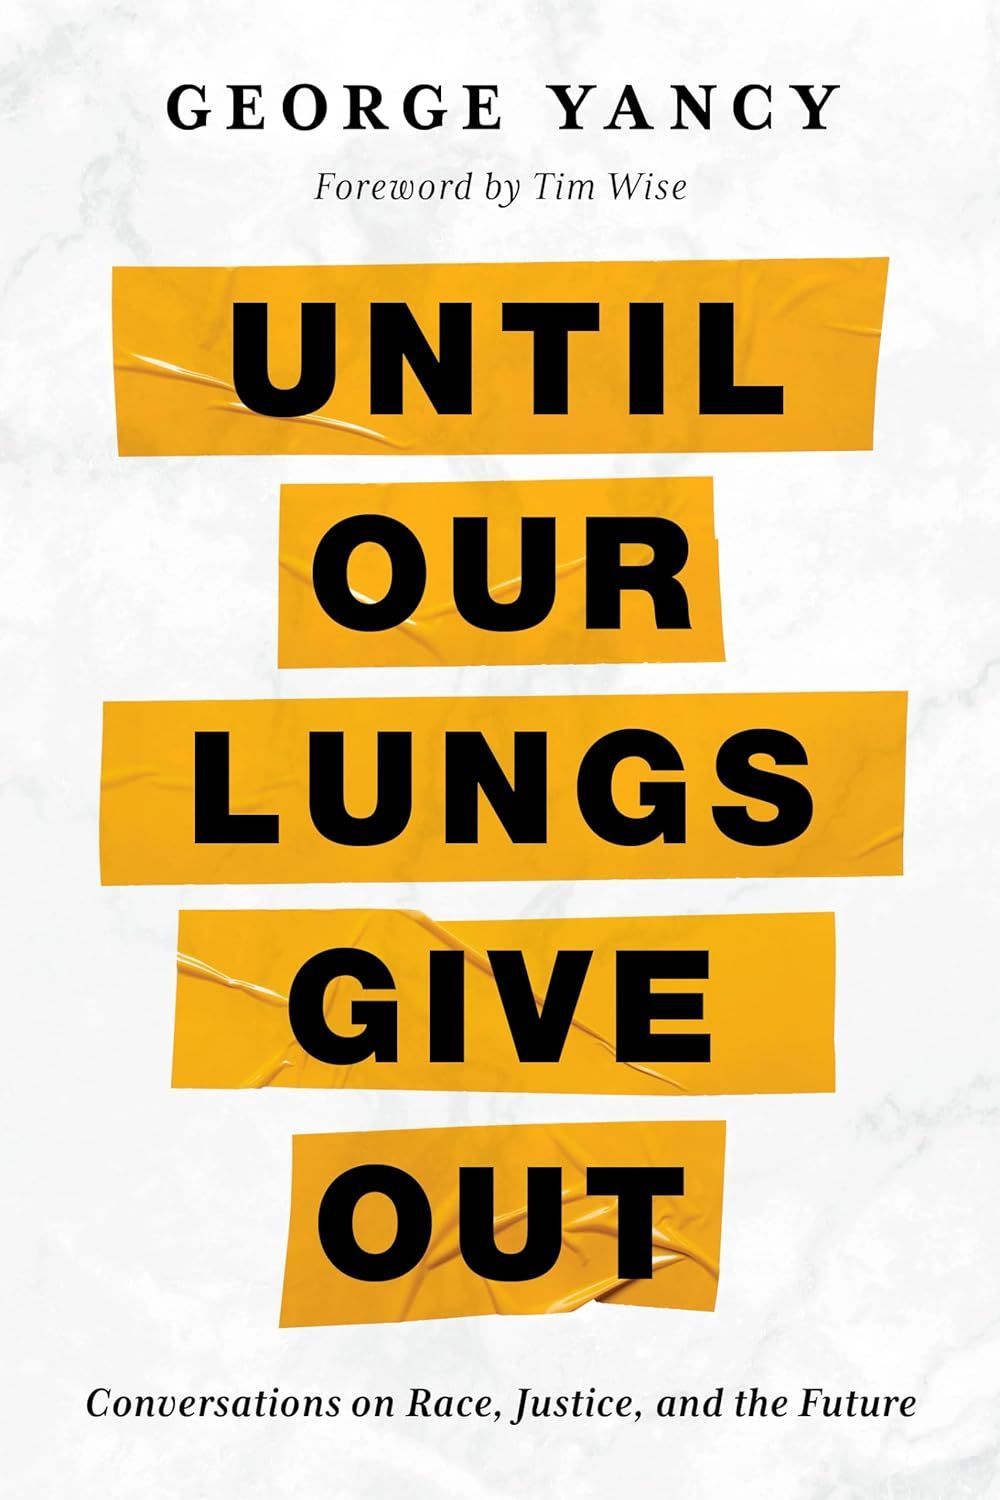 Purging the Poisons of Racism: On George Yancy’s “Until Our Lungs Give Out”